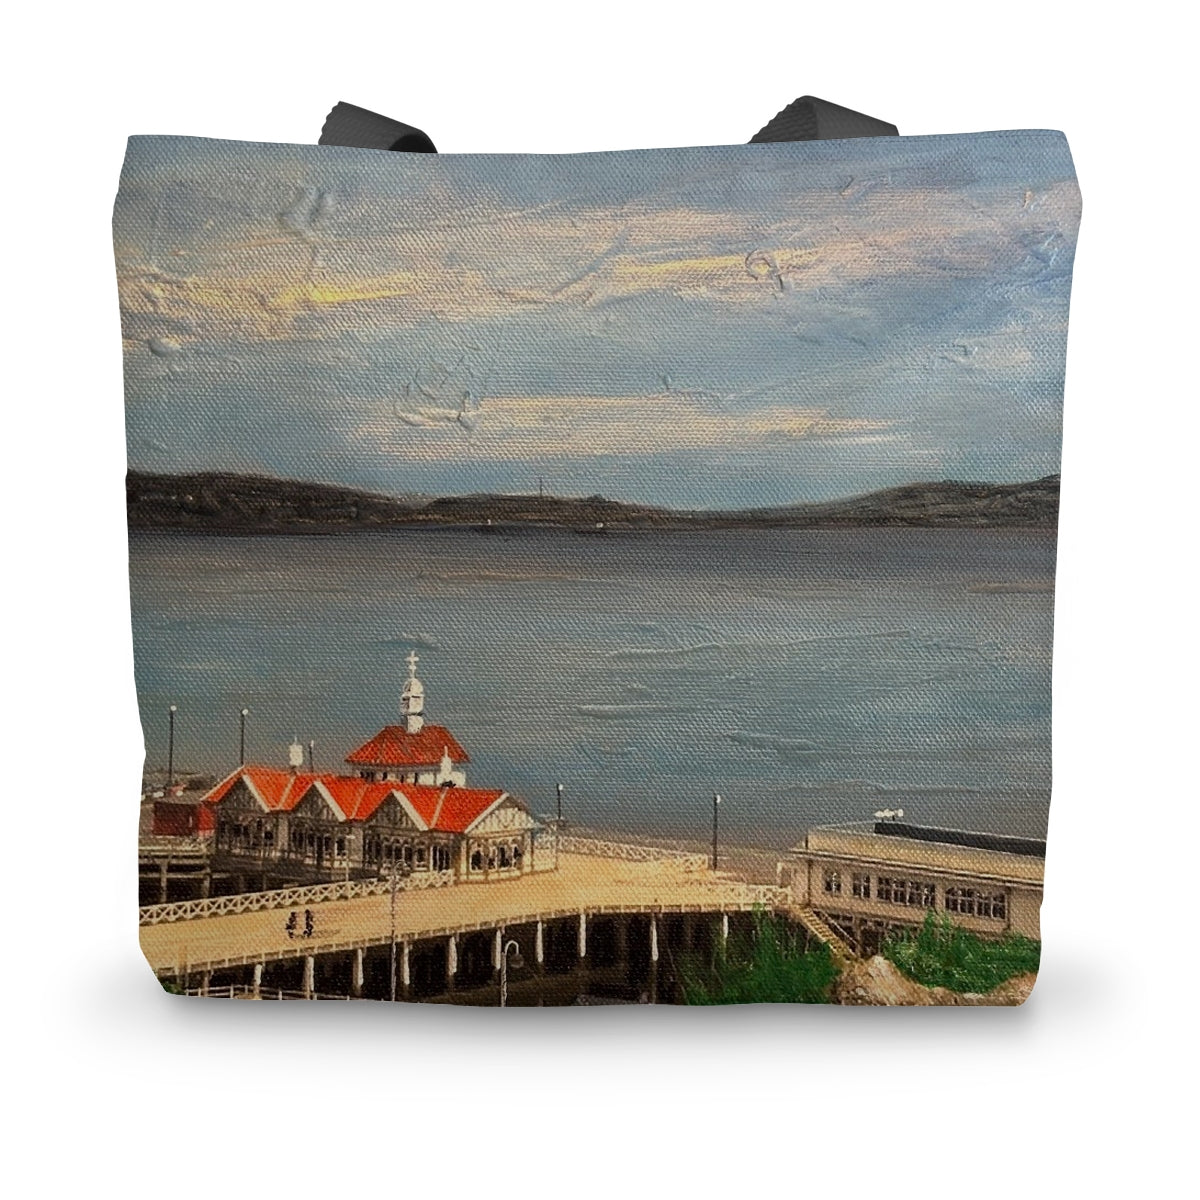 Looking From Dunoon Art Gifts Canvas Tote Bag-Bags-River Clyde Art Gallery-14"x18.5"-Paintings, Prints, Homeware, Art Gifts From Scotland By Scottish Artist Kevin Hunter